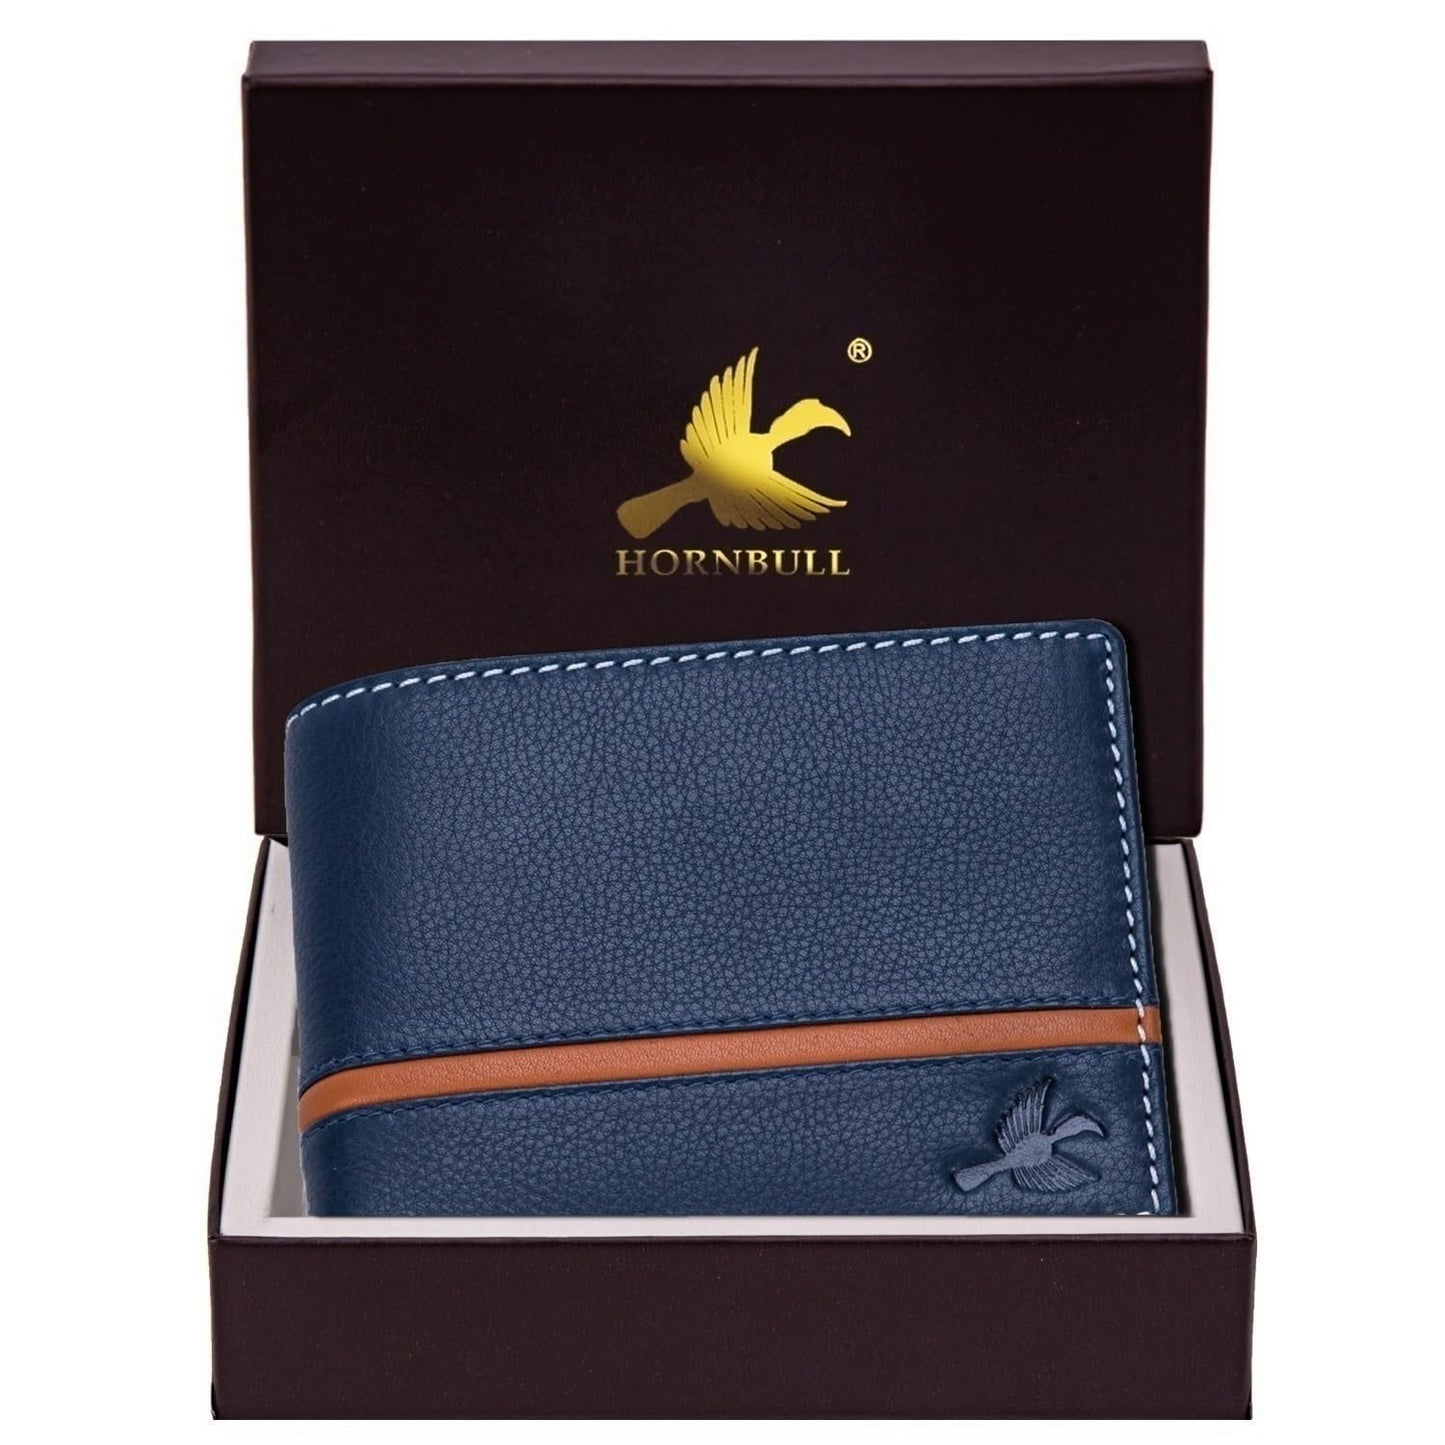 HORNBULL Denial Navy Leather Wallet for Men | Leather Mens Wallet with RFID Blocking | Wallets Men Genuine Leather - Blossom Mantra